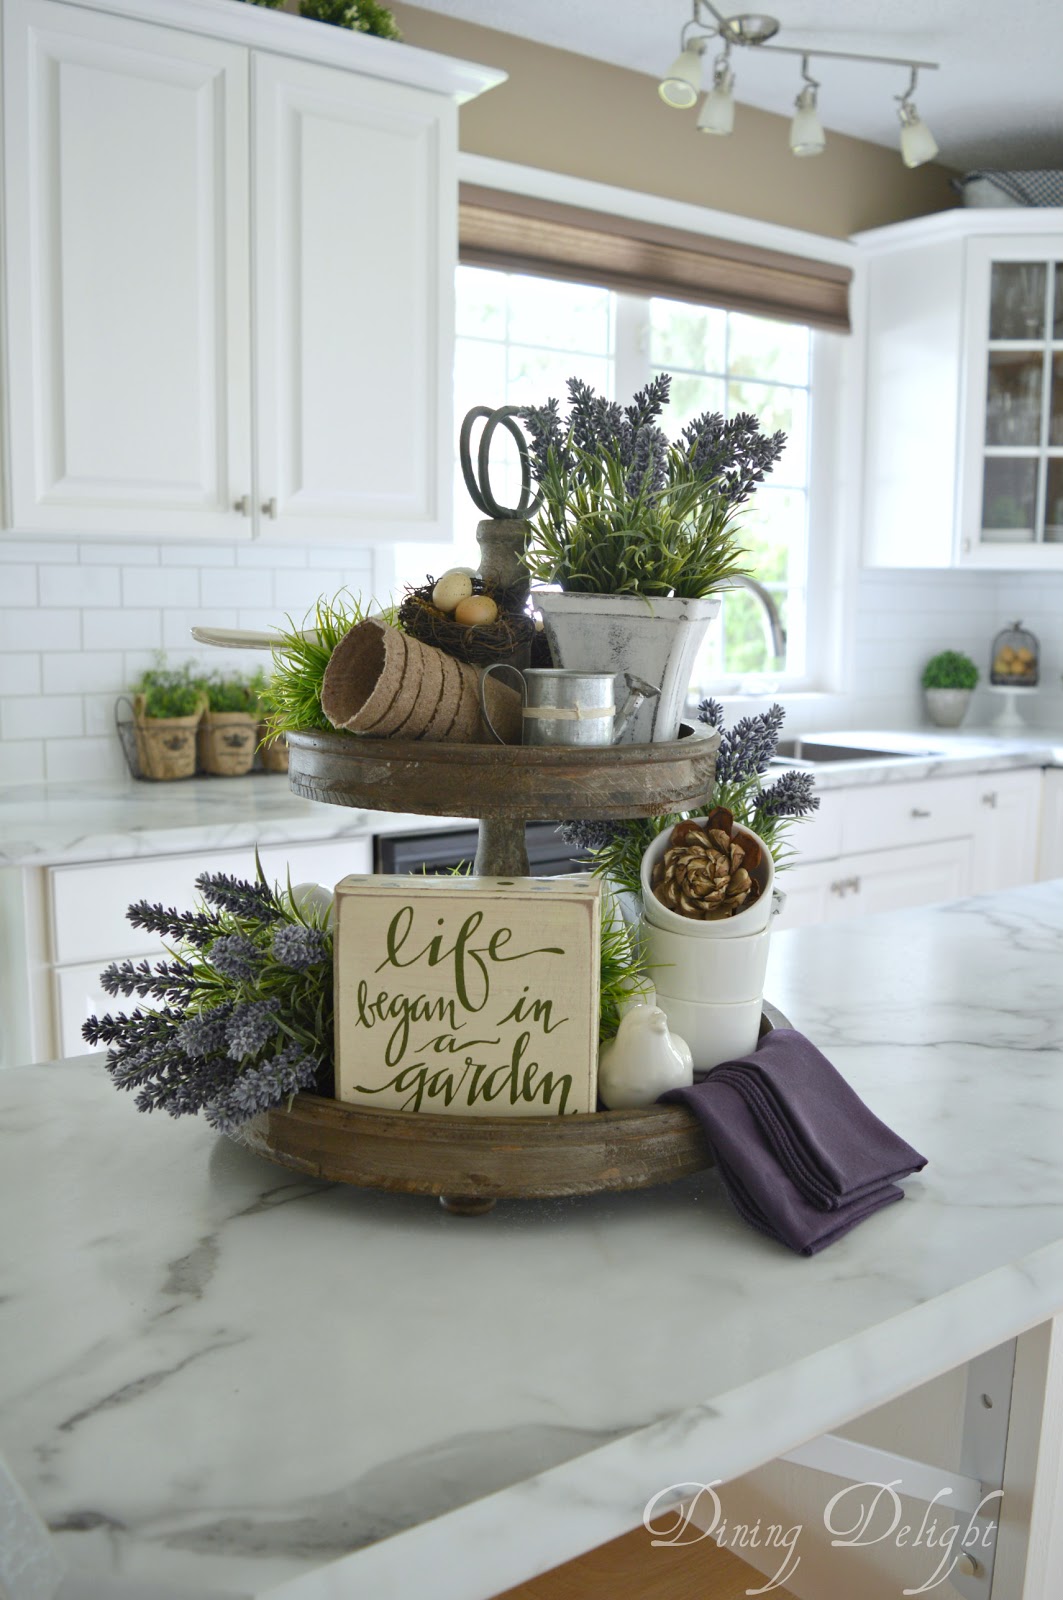 How to Decorate a 3 Tier Tray  Farmhouse kitchen decor, Kitchen stand,  Rustic kitchen decor